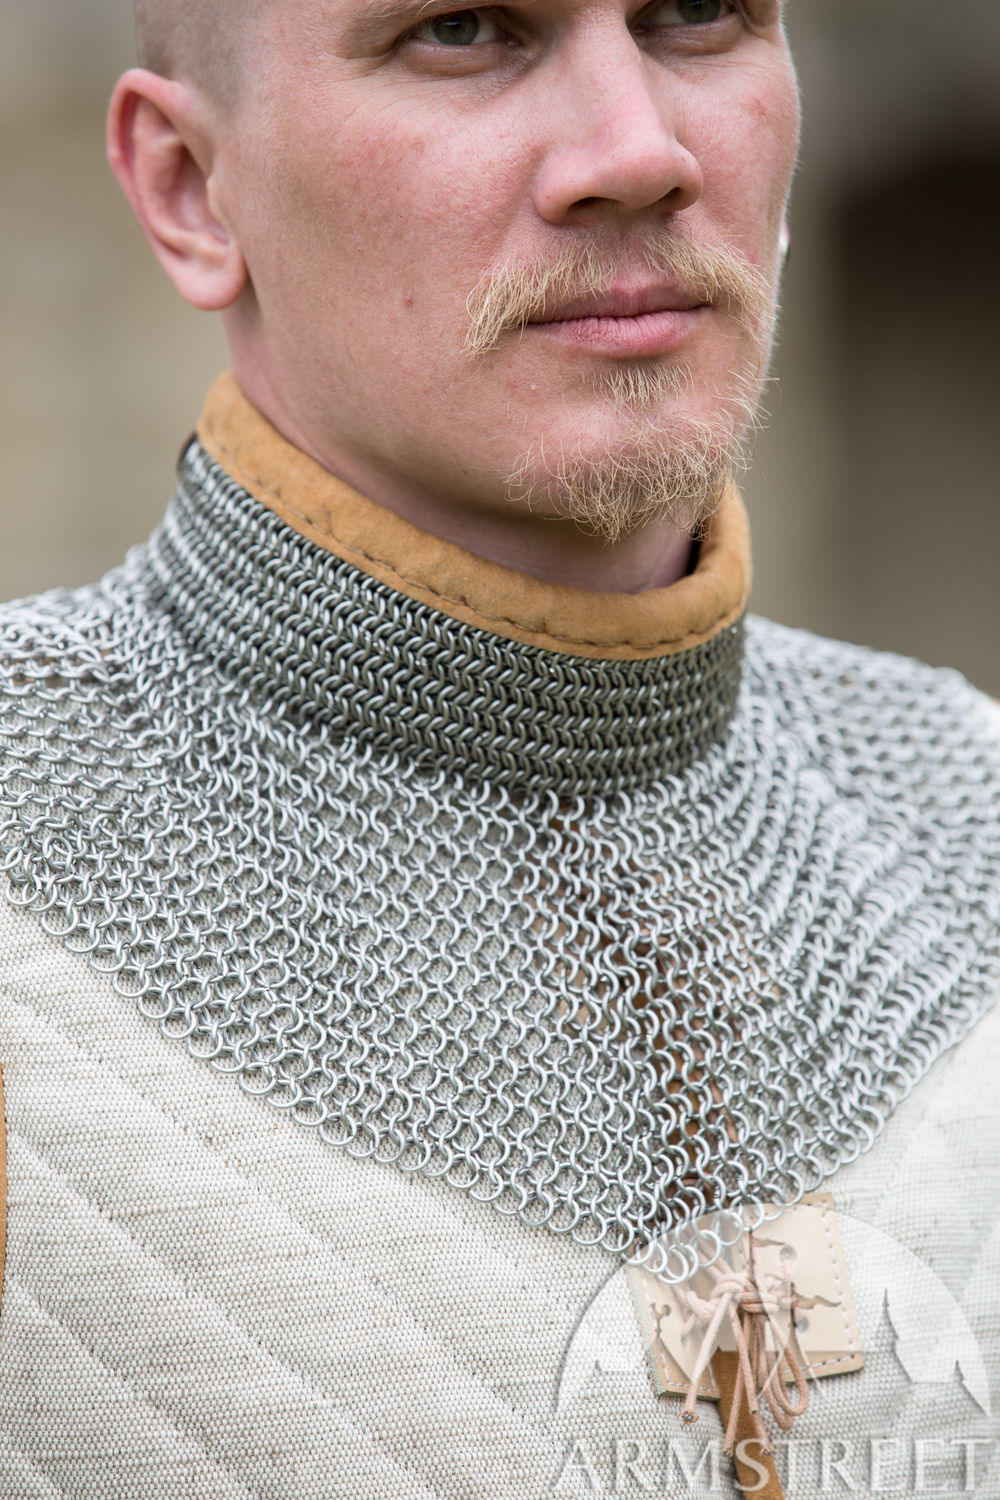 Stainless steel chainmail gorget